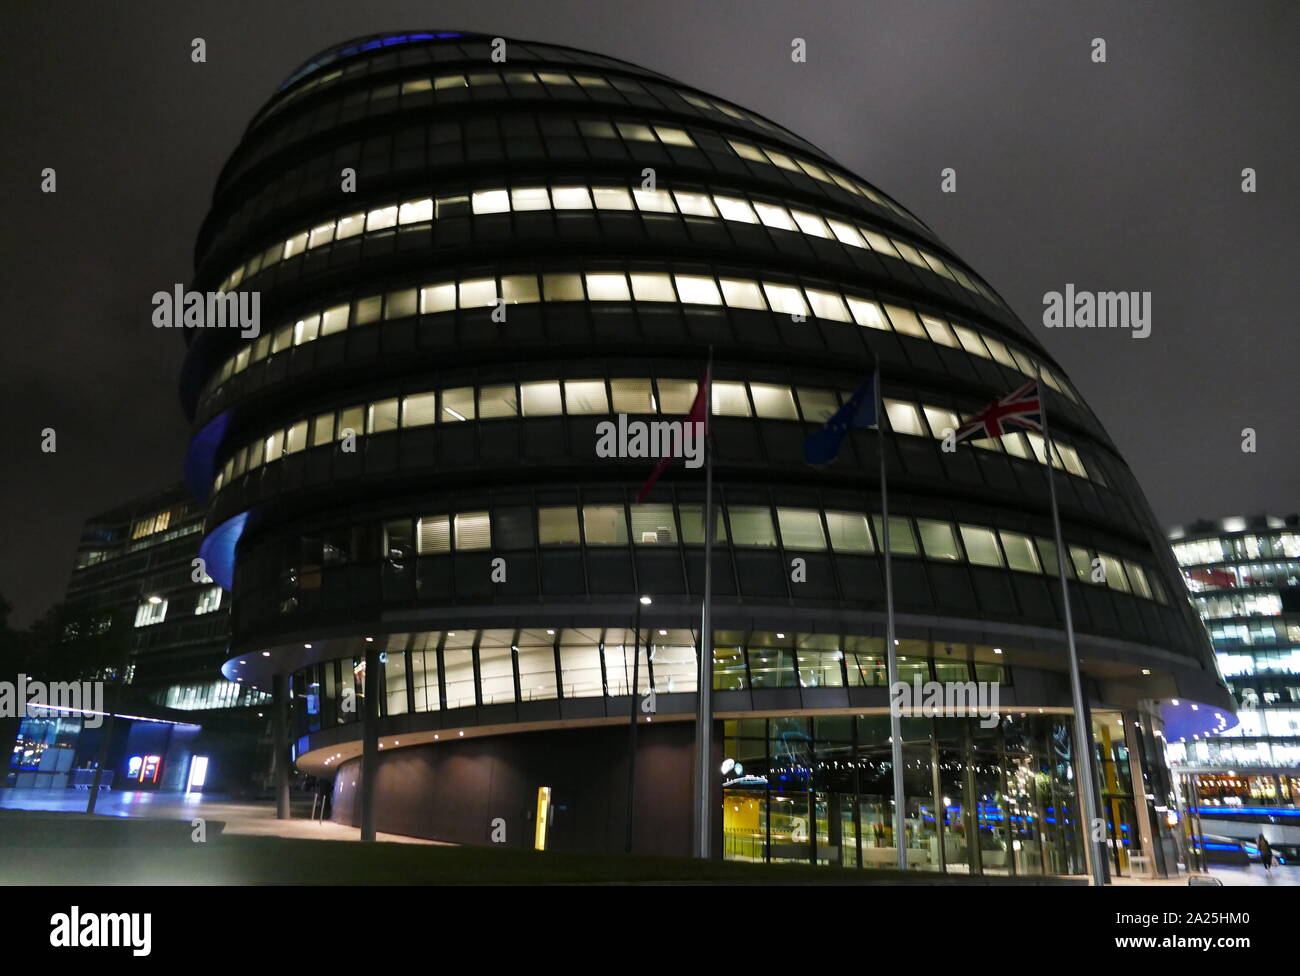 City Hall; headquarters of the Greater London Authority (GLA), which comprises the Mayor of London and the London Assembly. It is located in Southwark, on the south bank of the River Thames near Tower Bridge. It was designed by Norman Foster and opened in July 2002, Stock Photo